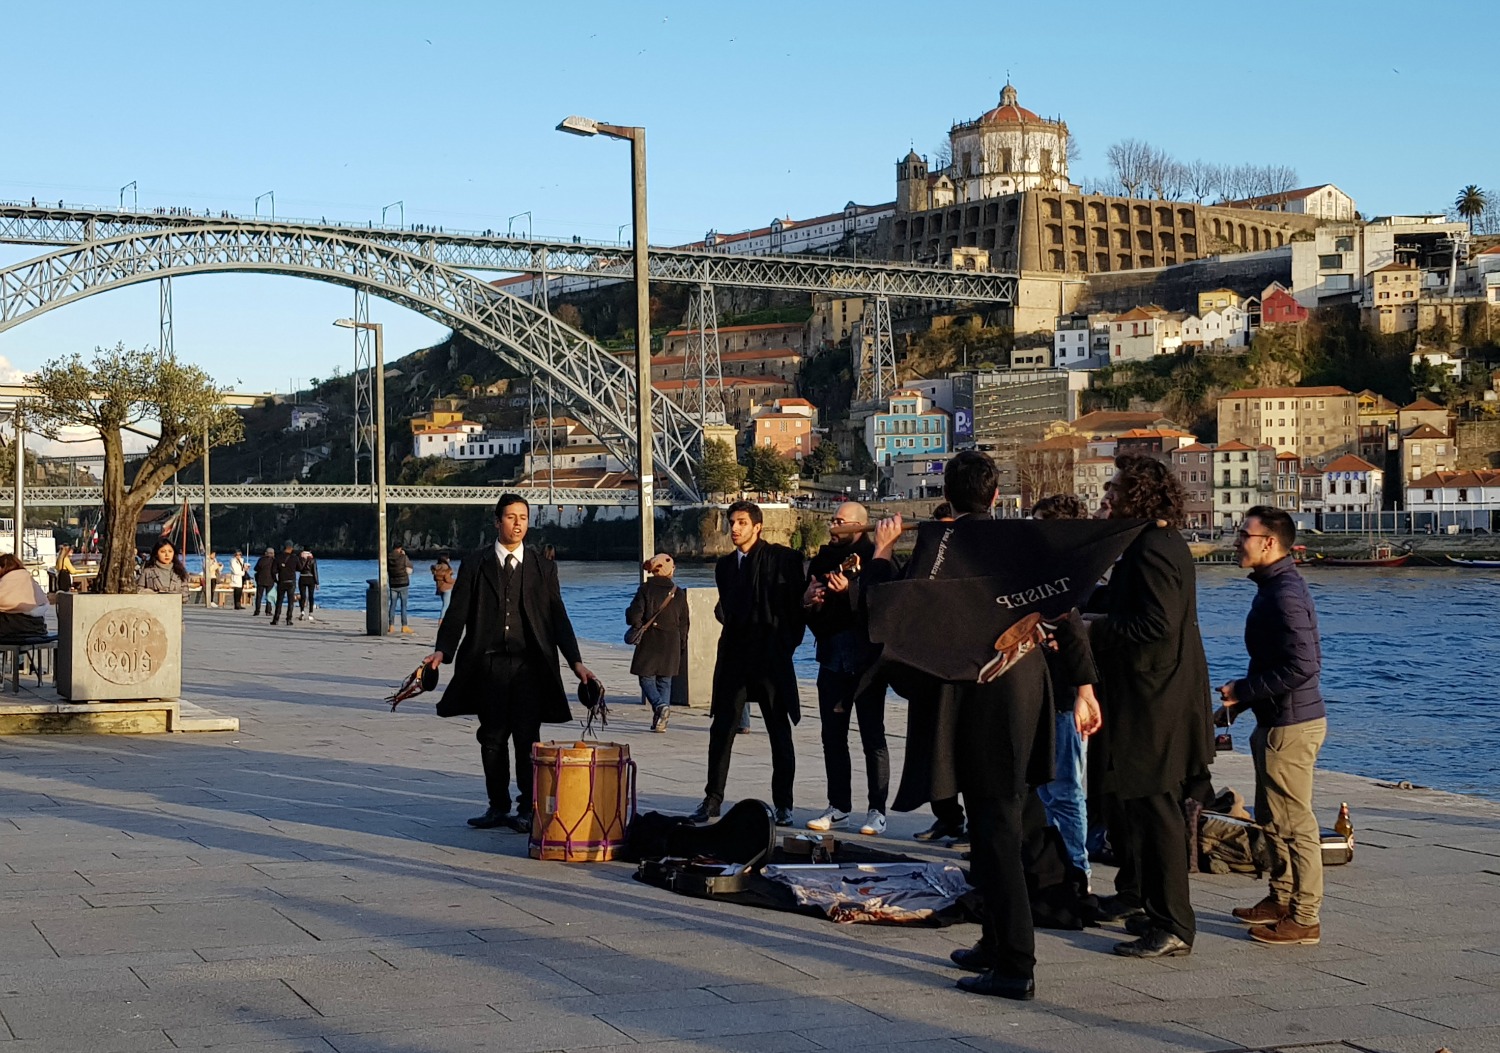 Street entertainers singing by the river in Porto - exploring the riverfront is one of the best things to do in Porto for families